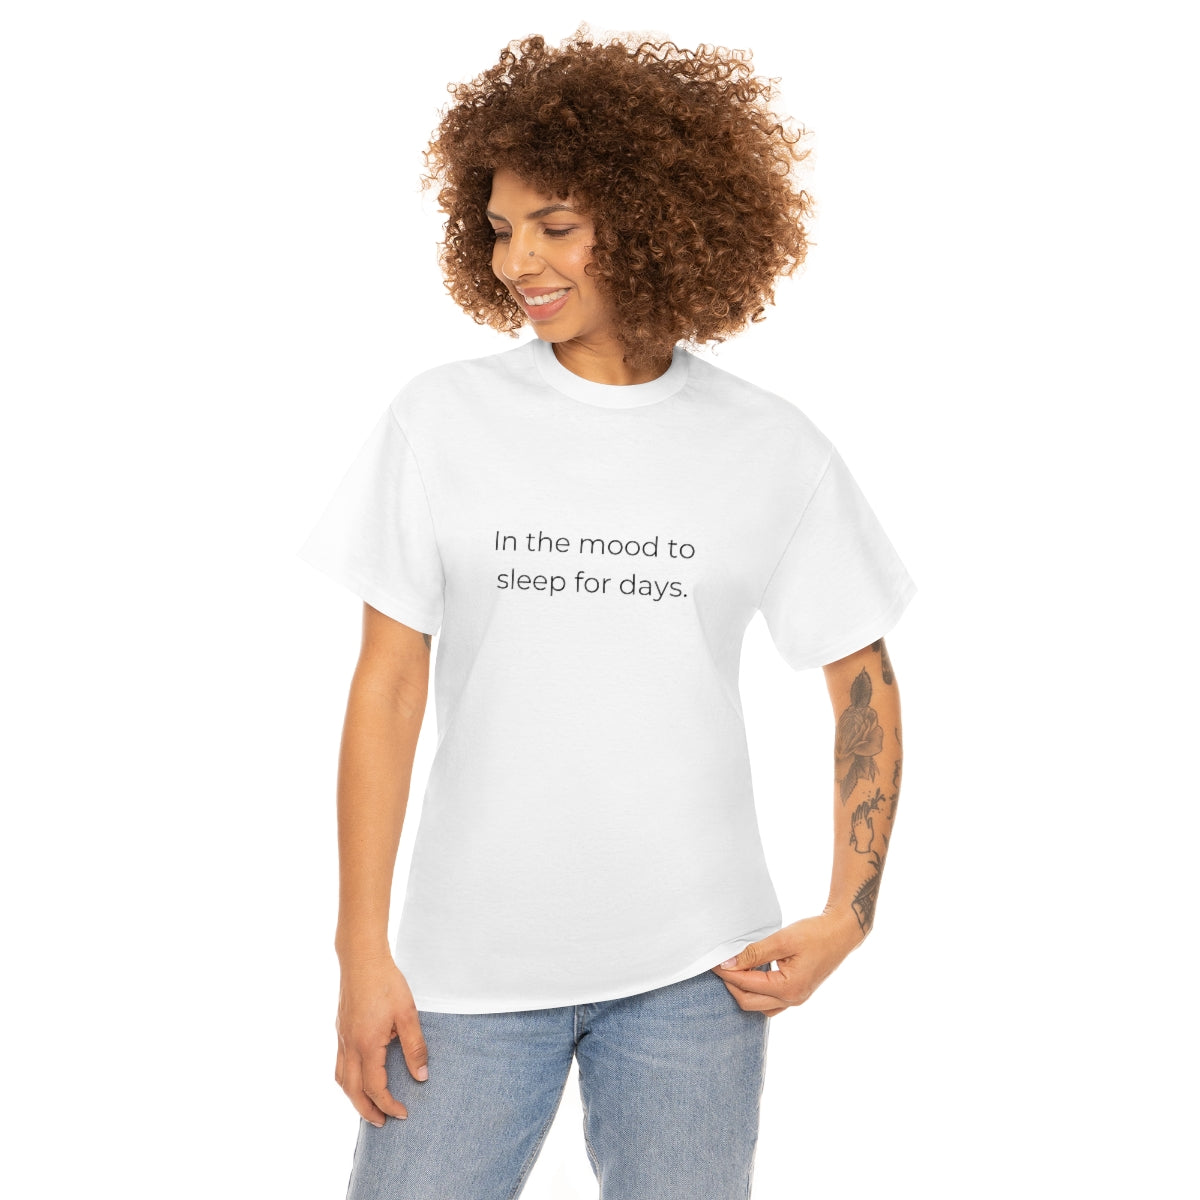 In The Mood To Sleep For Days Shirt, Always Tired Shirt, New Mom Gift Postpartum, New Mom Tee, New Dad Shirt, Tired Mom Shirt, Funny Tshirt - The Good Life Vibe